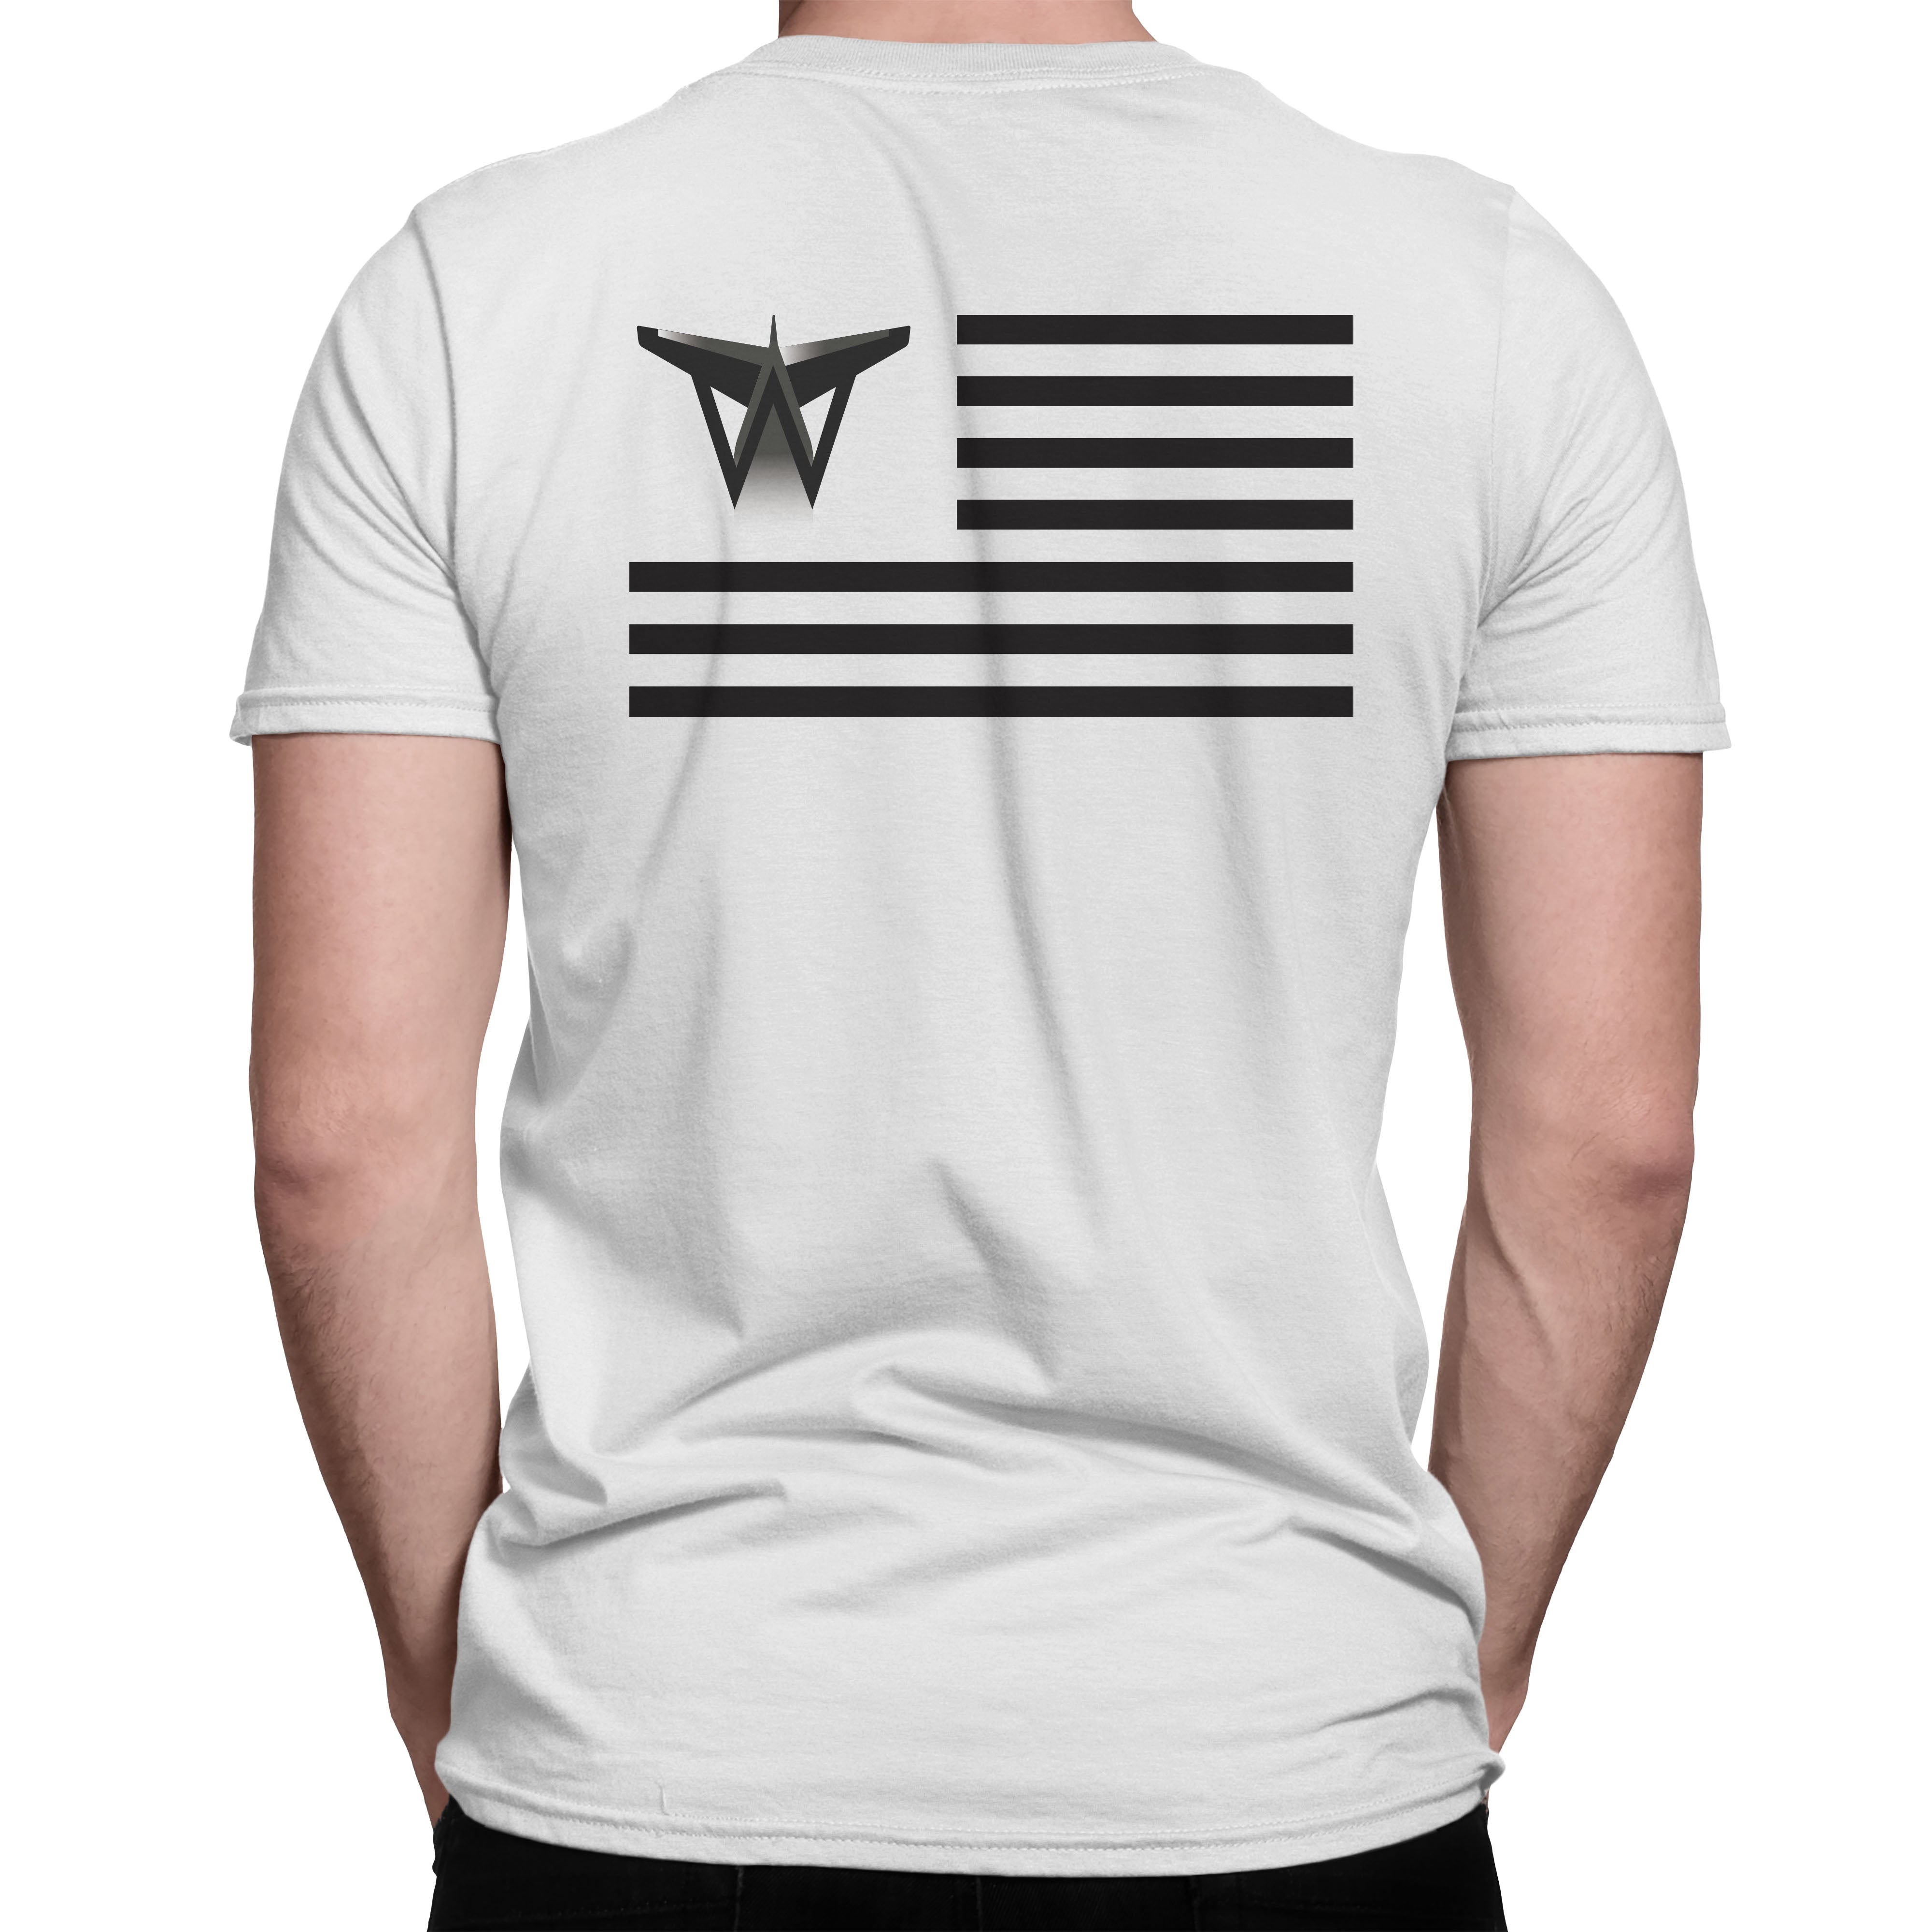 Whale-Tail Sales American Flag T-Shirt